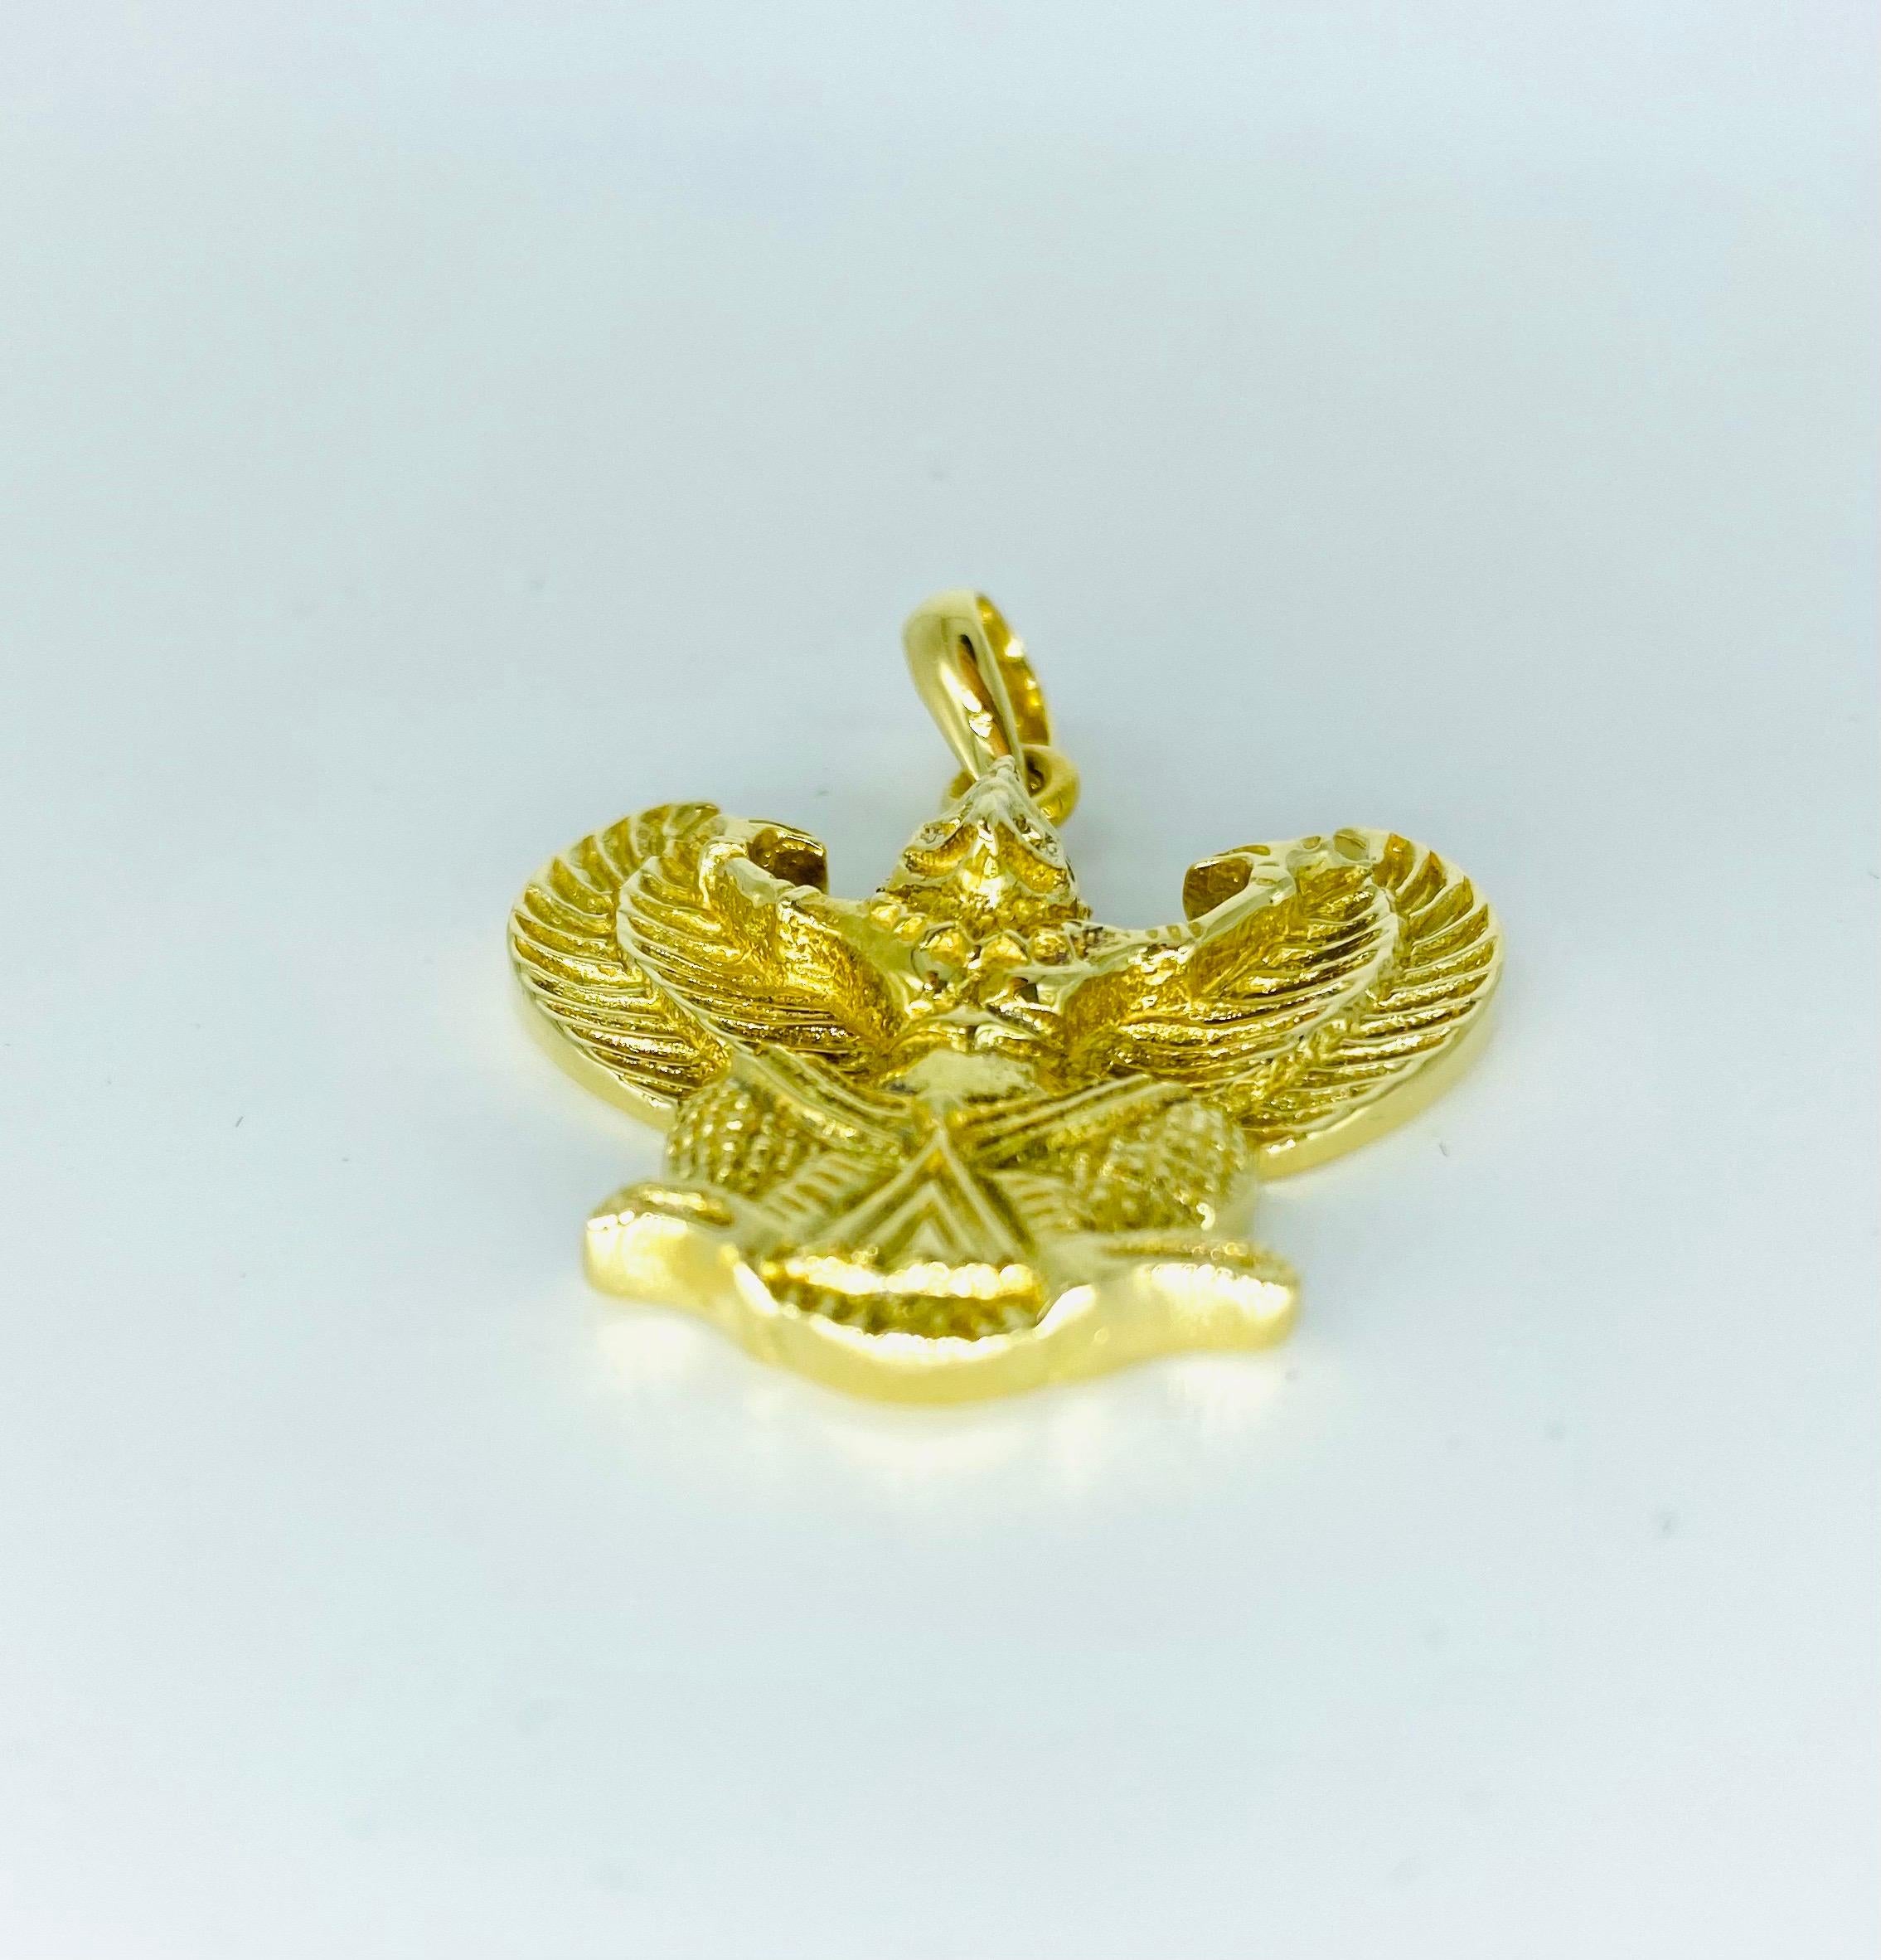 Vintage Egyptian Horus Eagle Pendant Heavy Solid Gold 18 Karat In Excellent Condition For Sale In Miami, FL